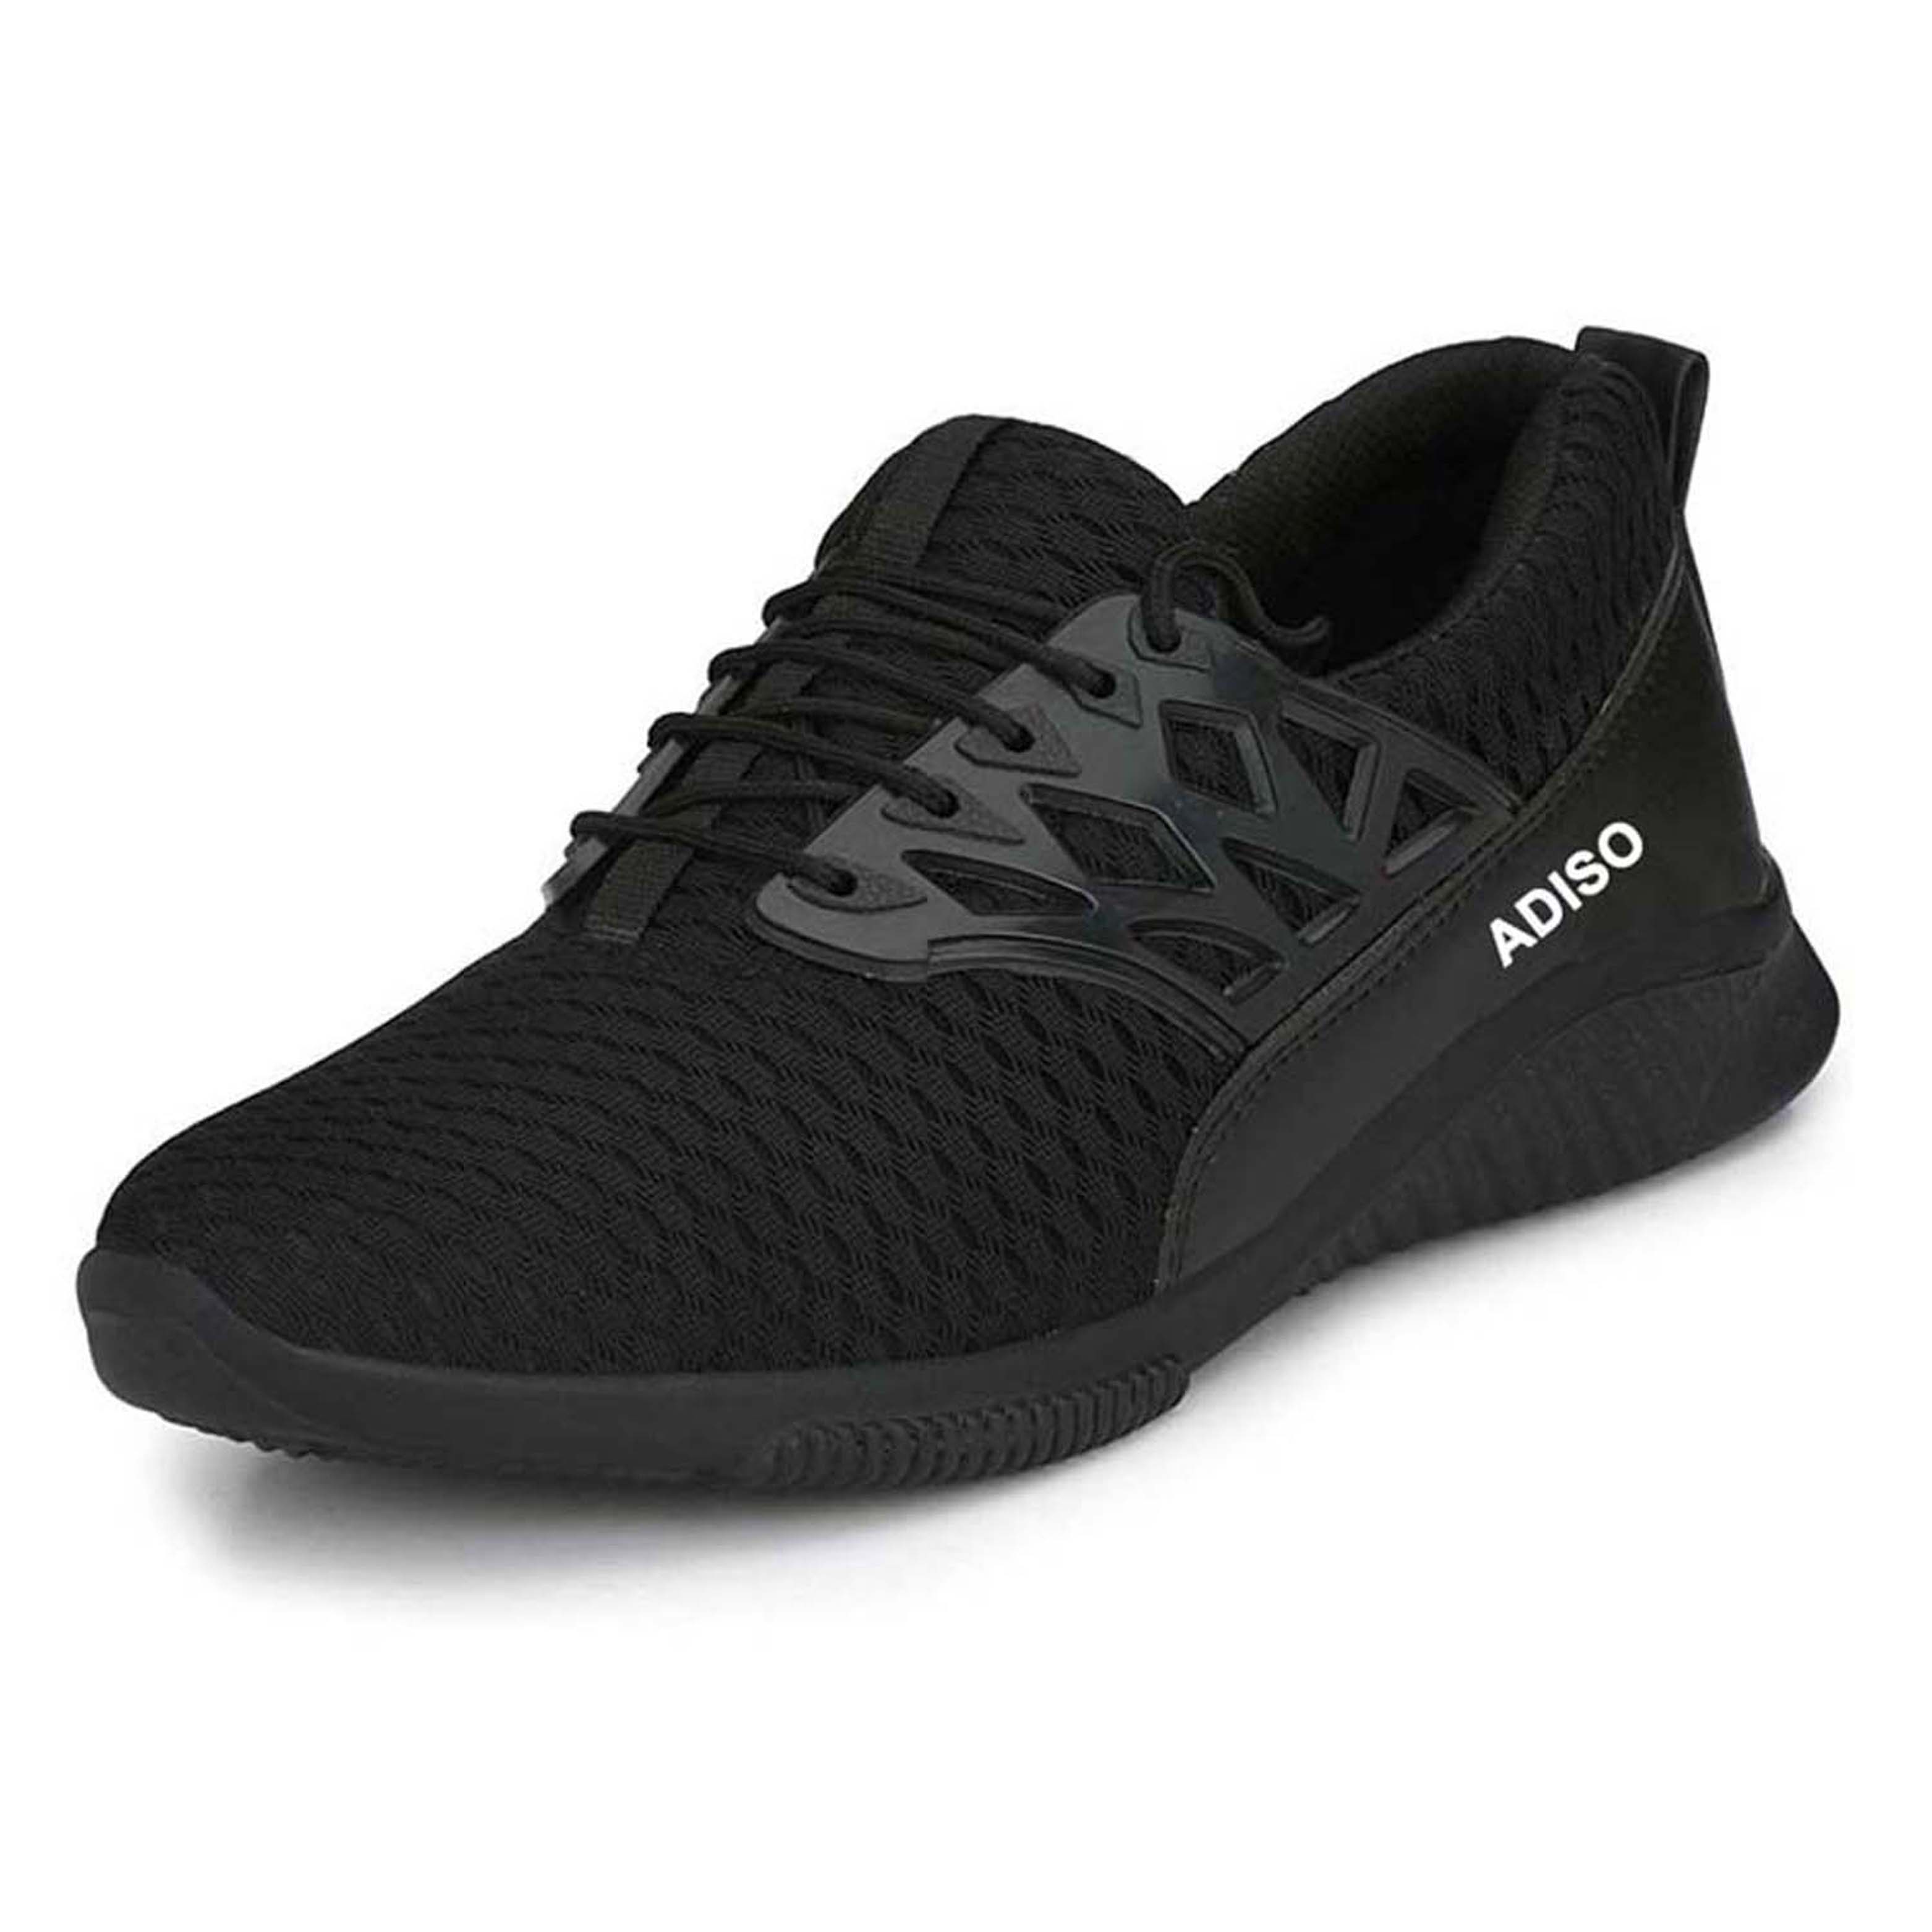 Buy Adiso Men's Black Sports Shoes Online @ ₹499 from ShopClues